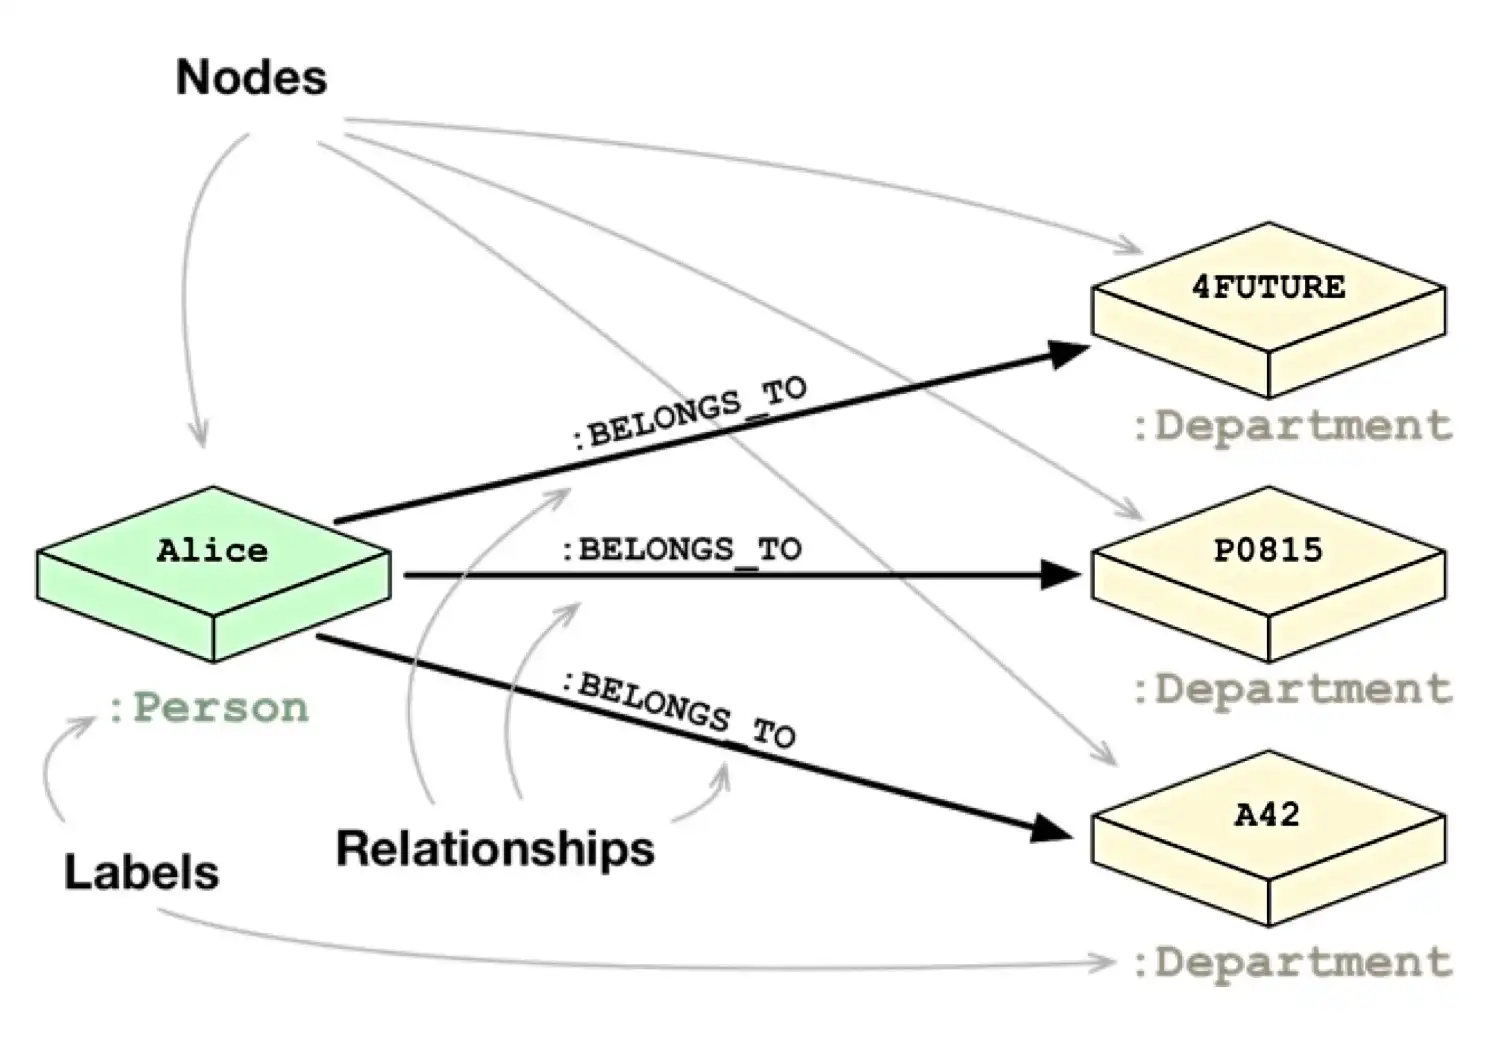 Neo4j nodes and relations